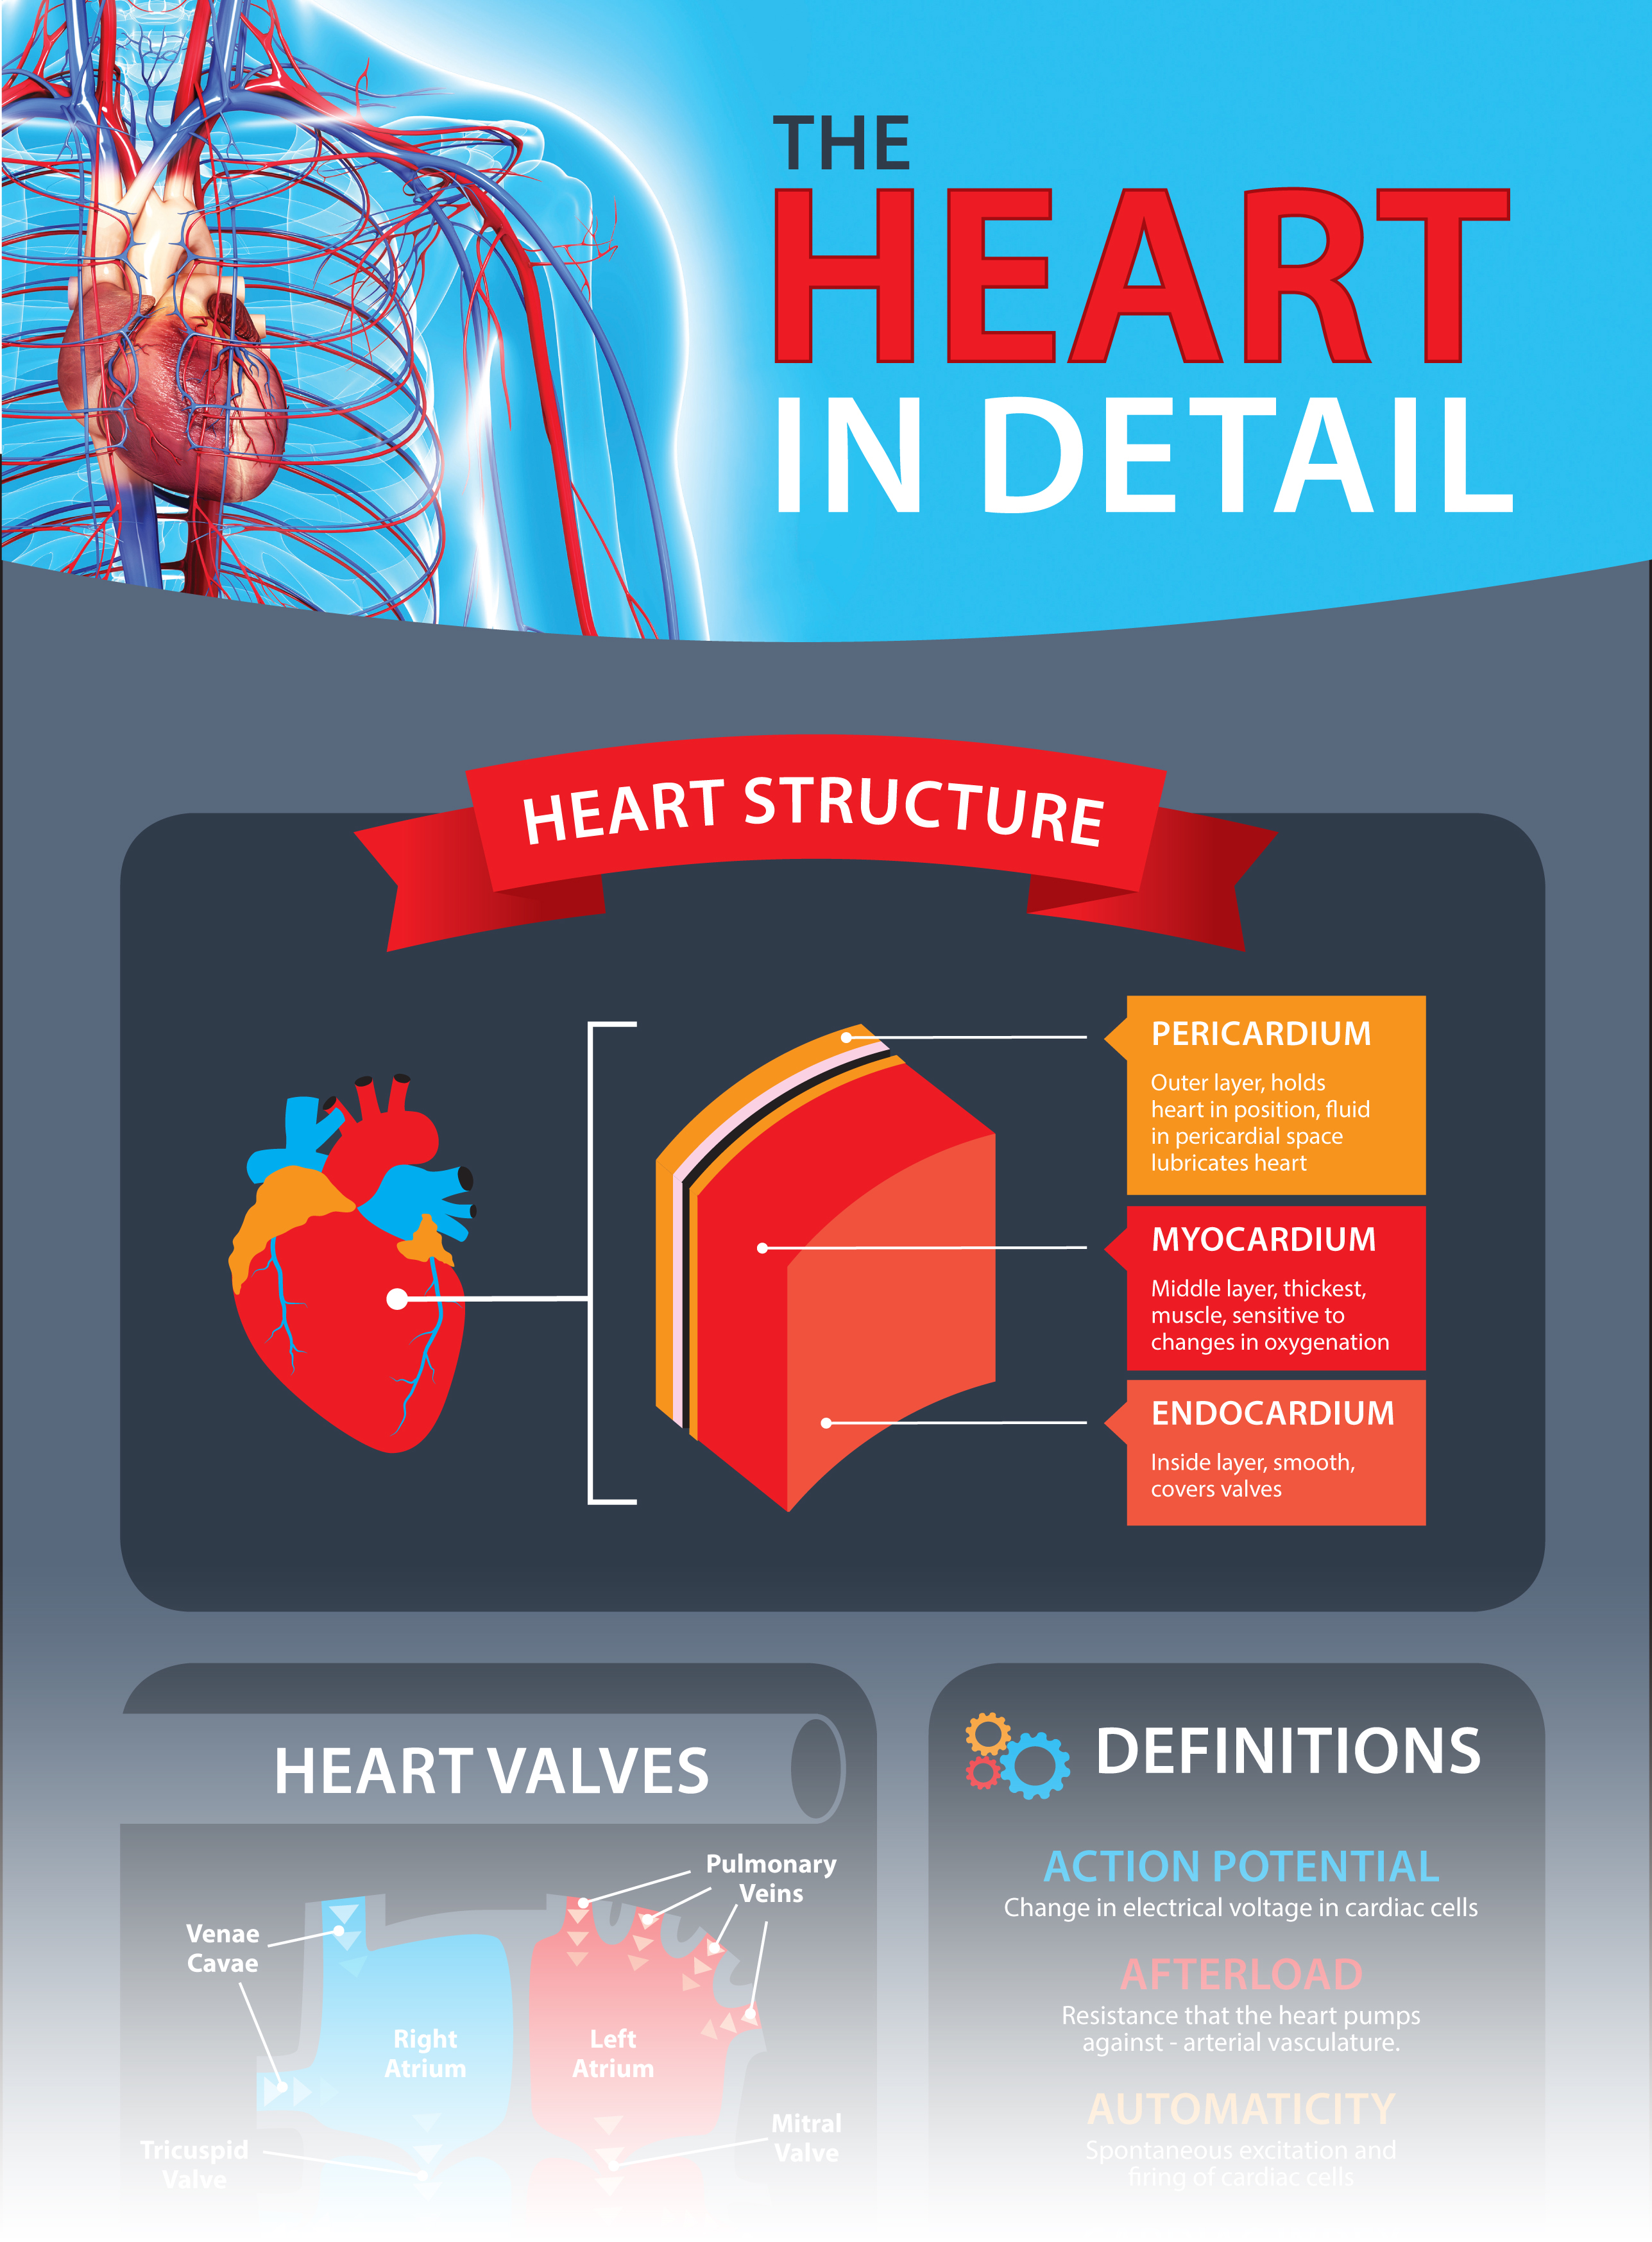 The Heart in Detail